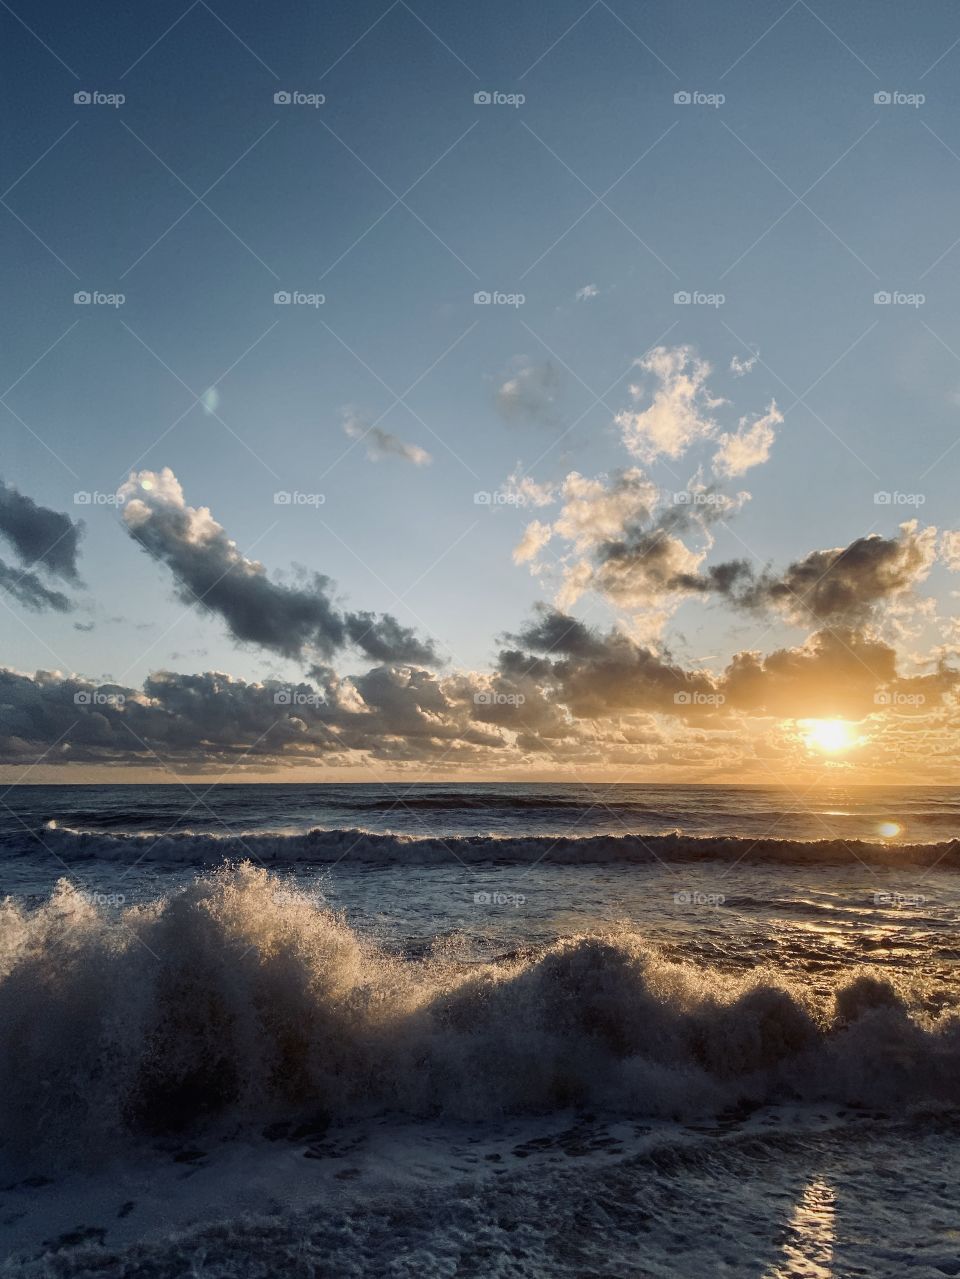 Sea waves splashing on sunset with cinematic clouds